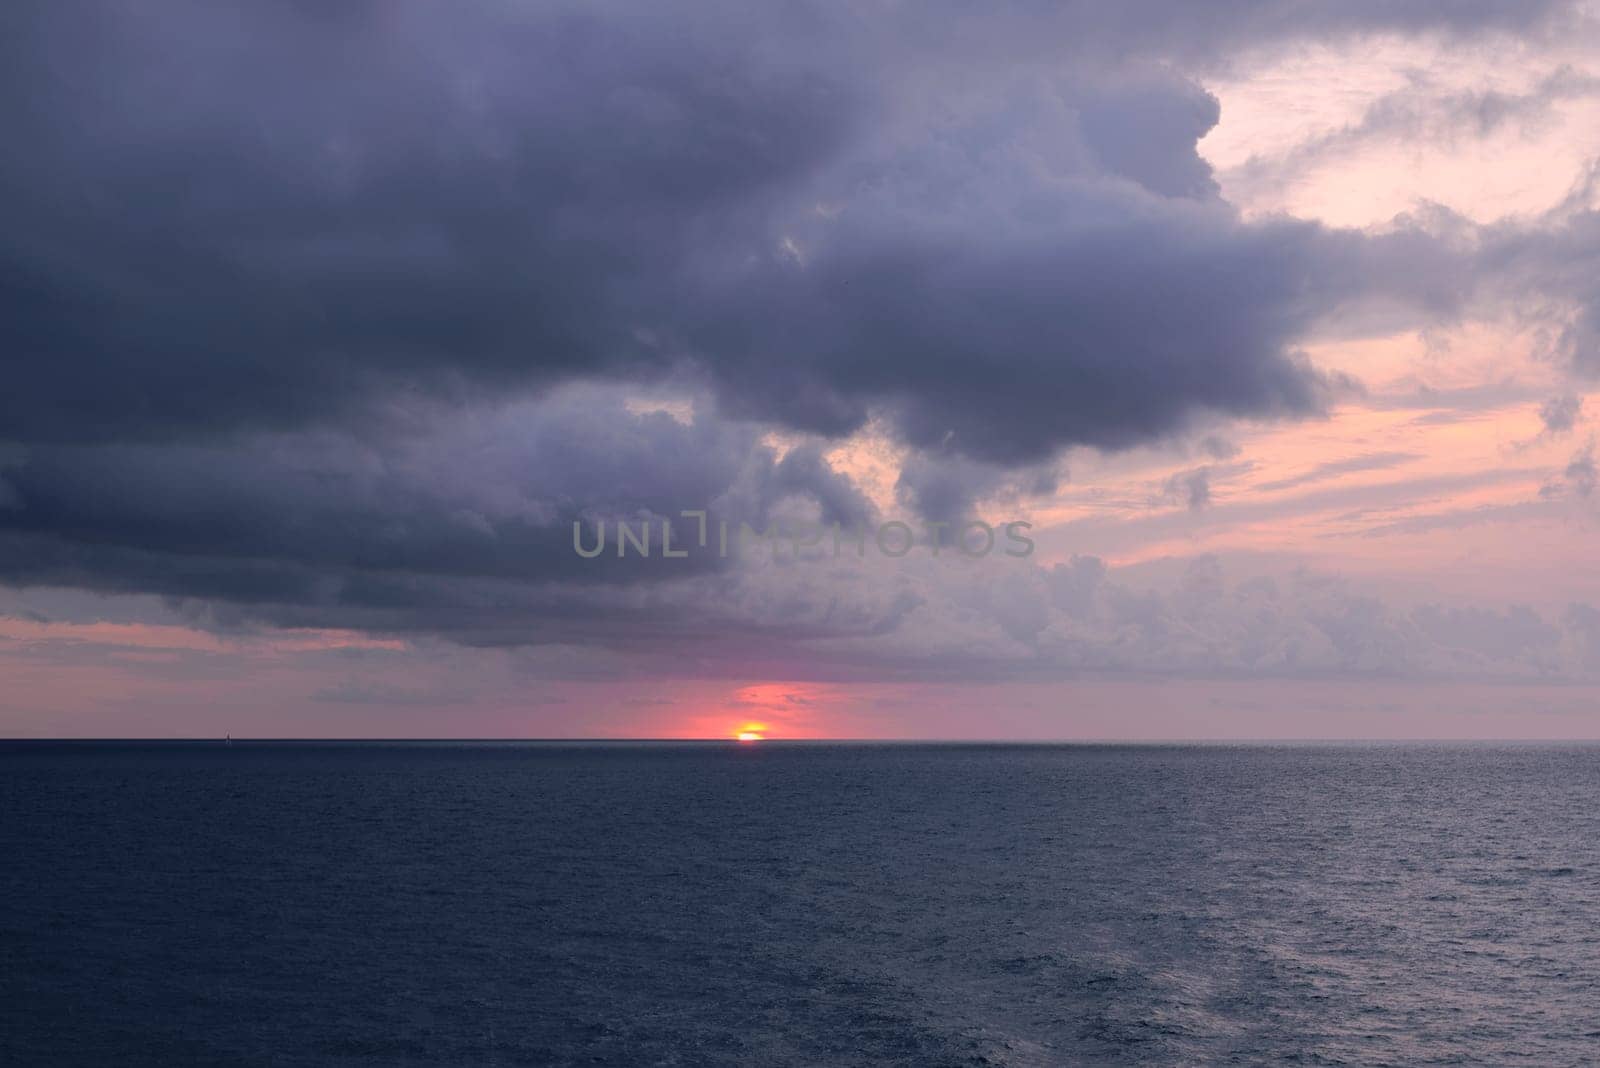 Sunset over the mediterranean sea on a cloudy day.Ocean, rain clouds, horizon line, empty space with no one, cold tones, blue, orange sunshine